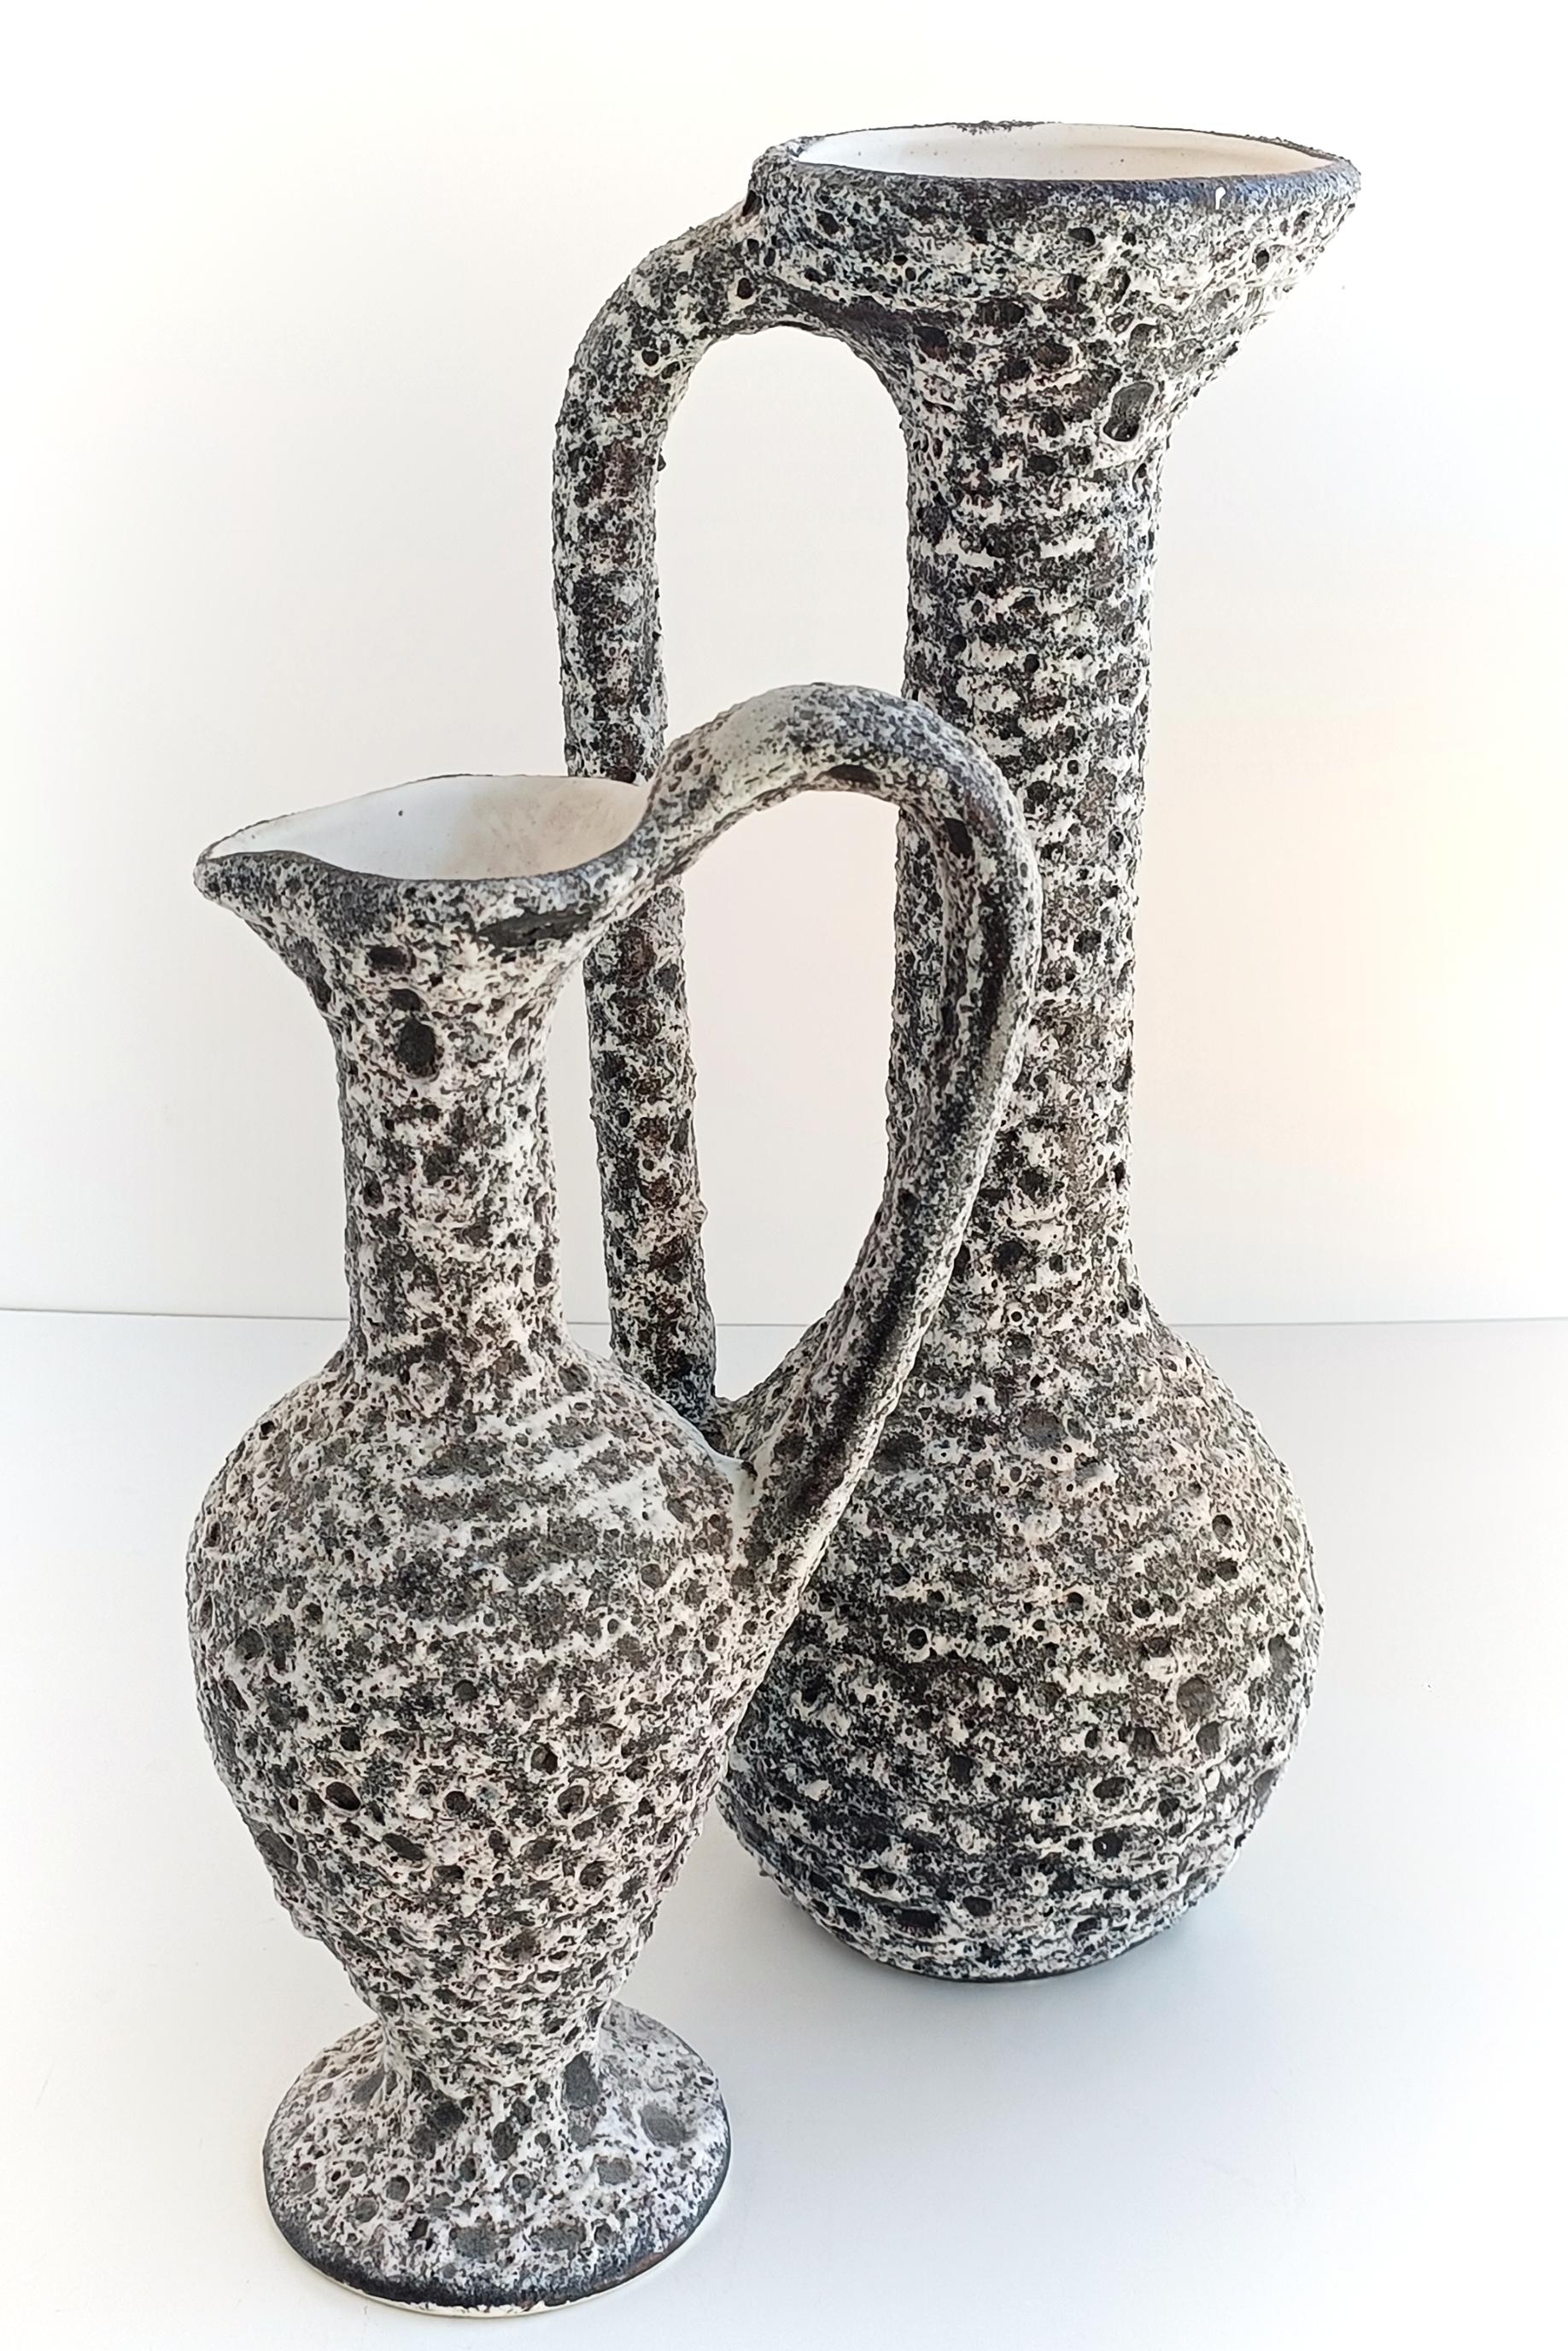 Vintage French Vallauris Set of Two Ceramic Pitchers Signed Alain Rufas, 1960s For Sale 5